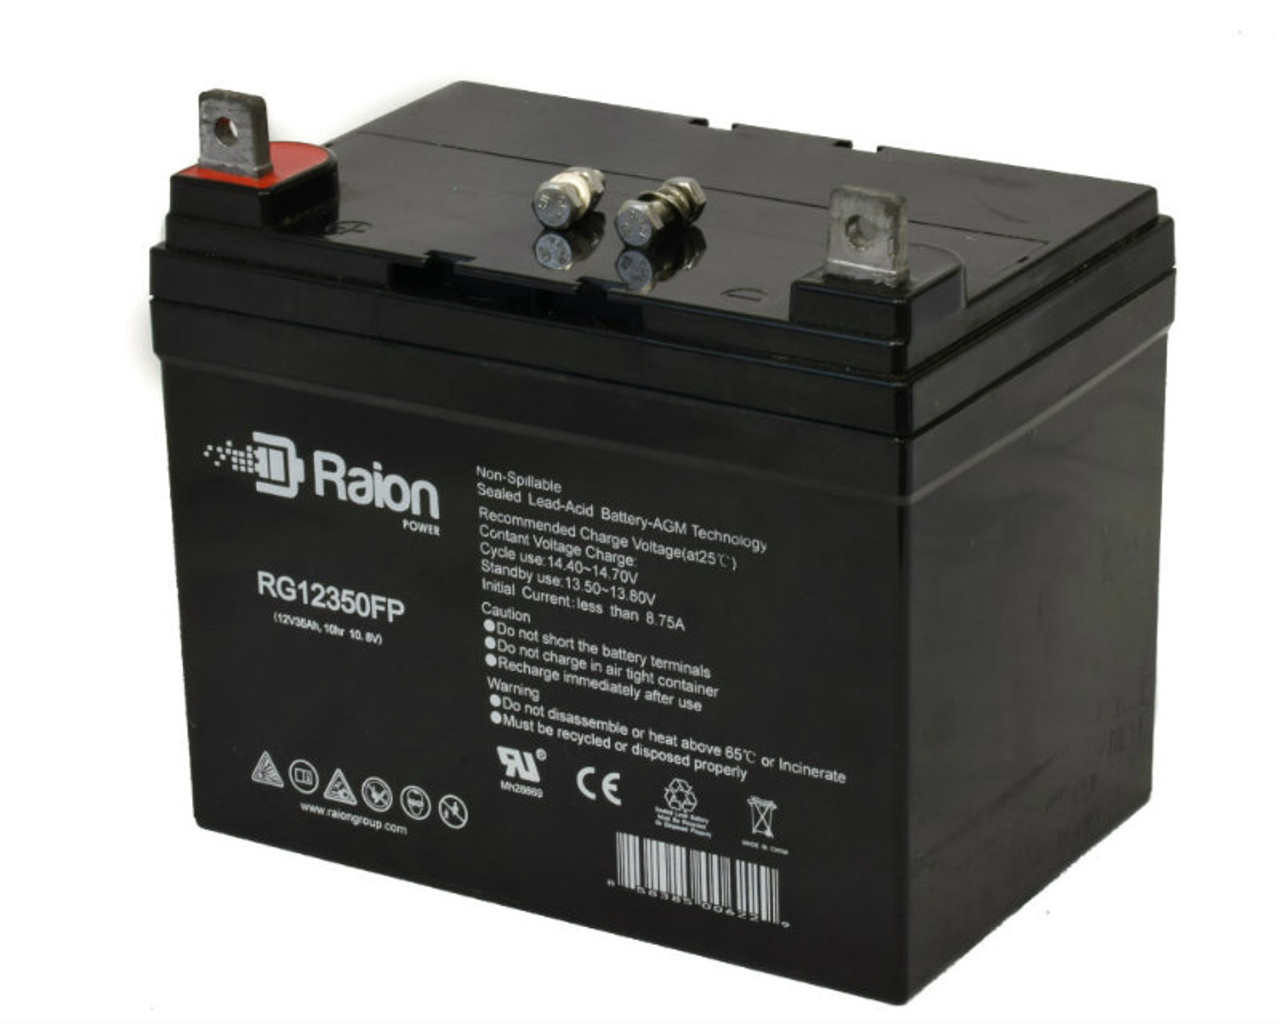 Raion Power Replacement 12V 35Ah RG12350FP Mobility Scooter Battery for Golden Technologies Companion GC422